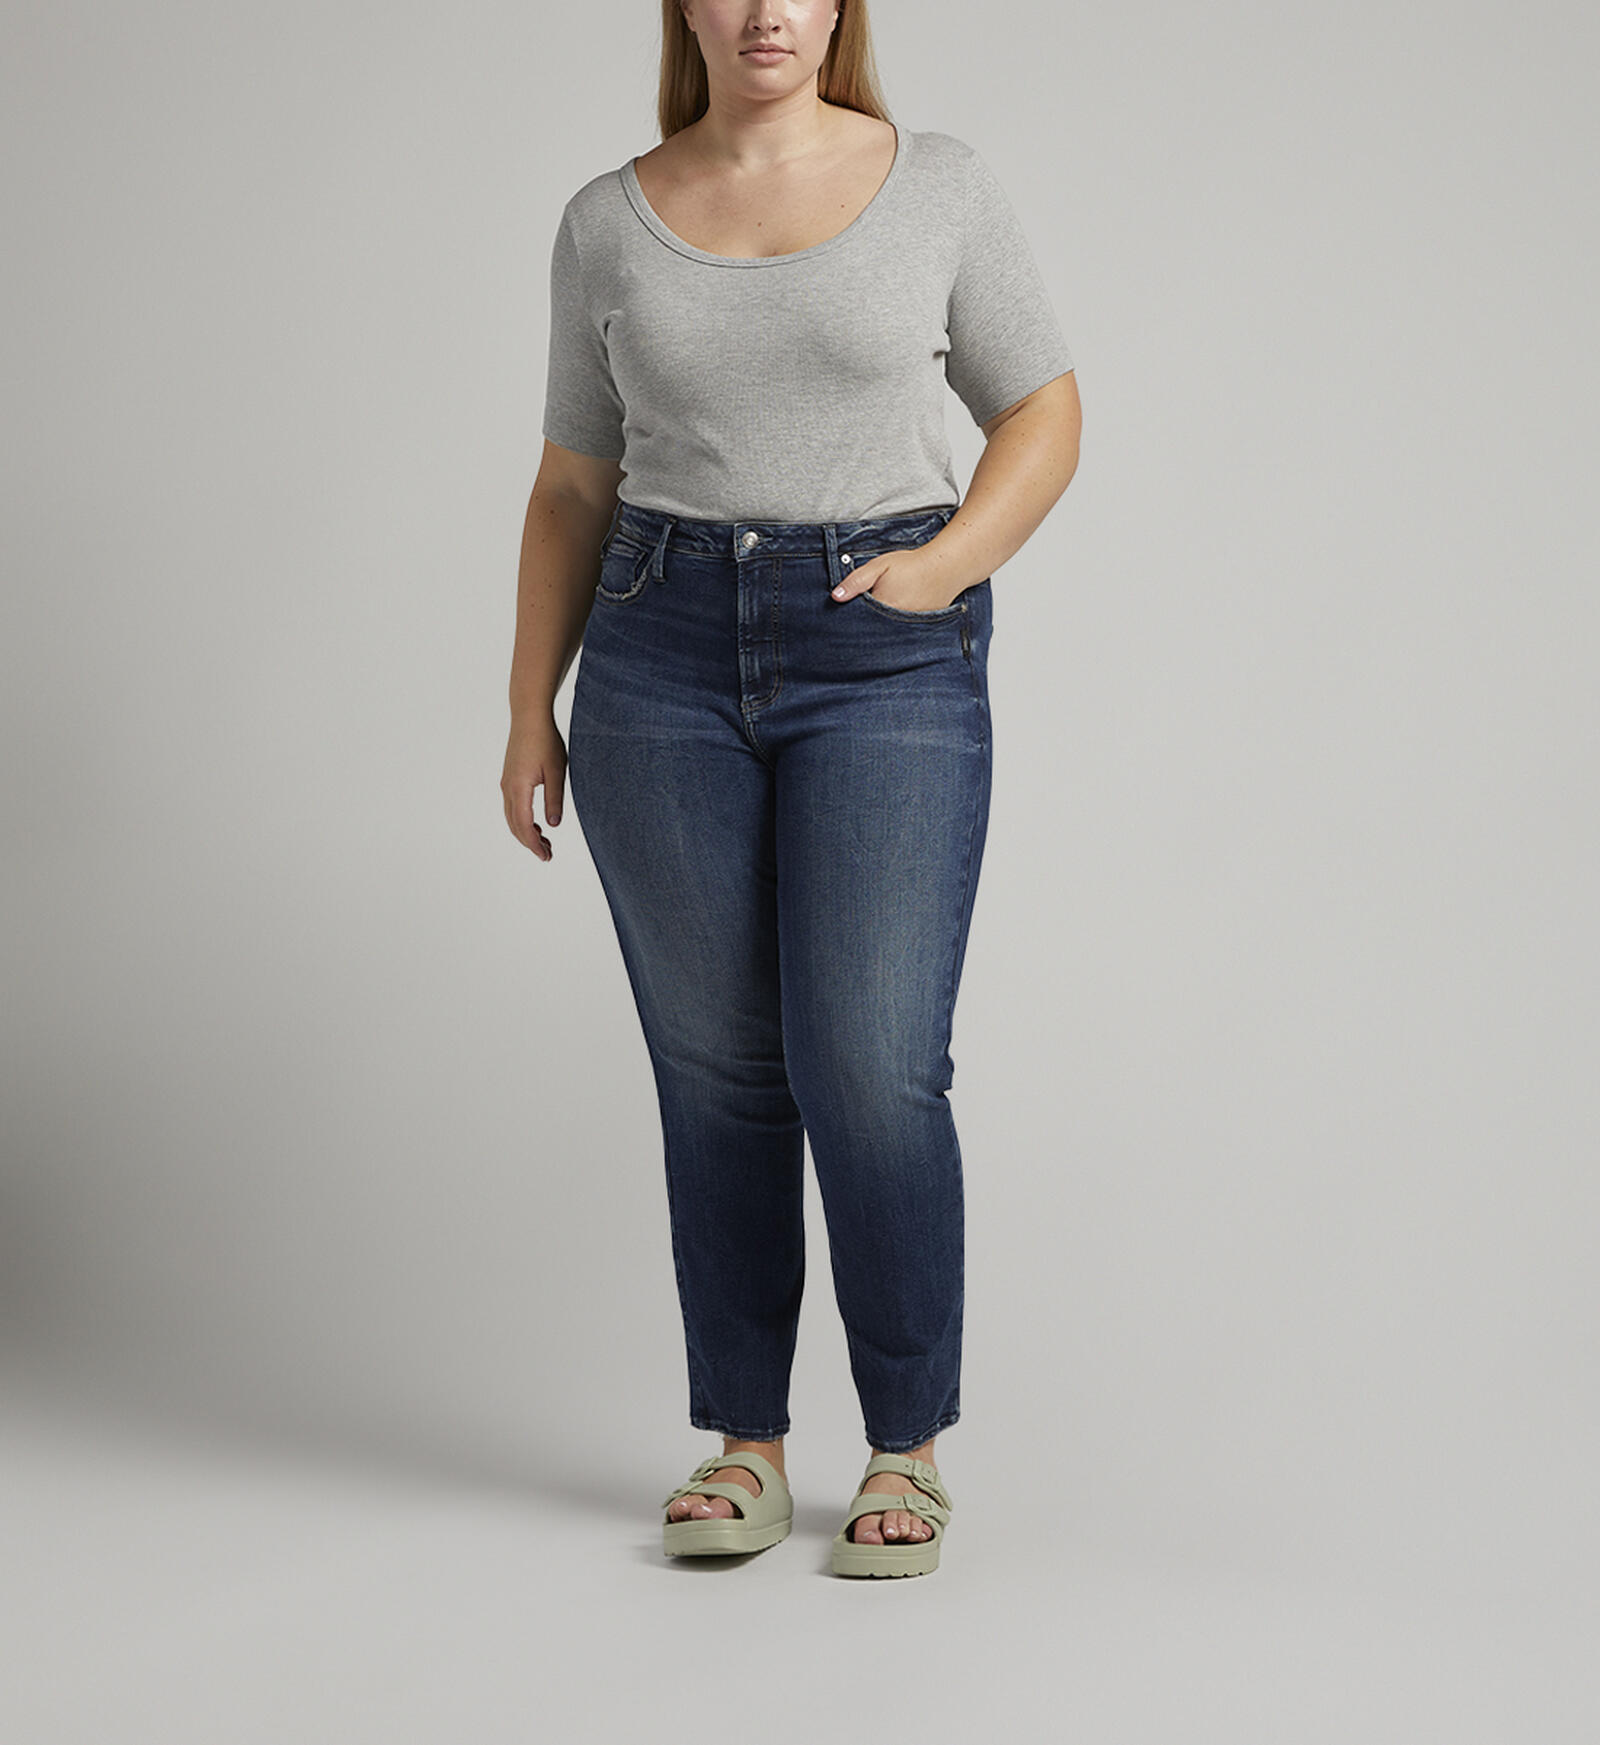 Just My Size Women's Plus Size Pull-On Stretch Denim Jeggings